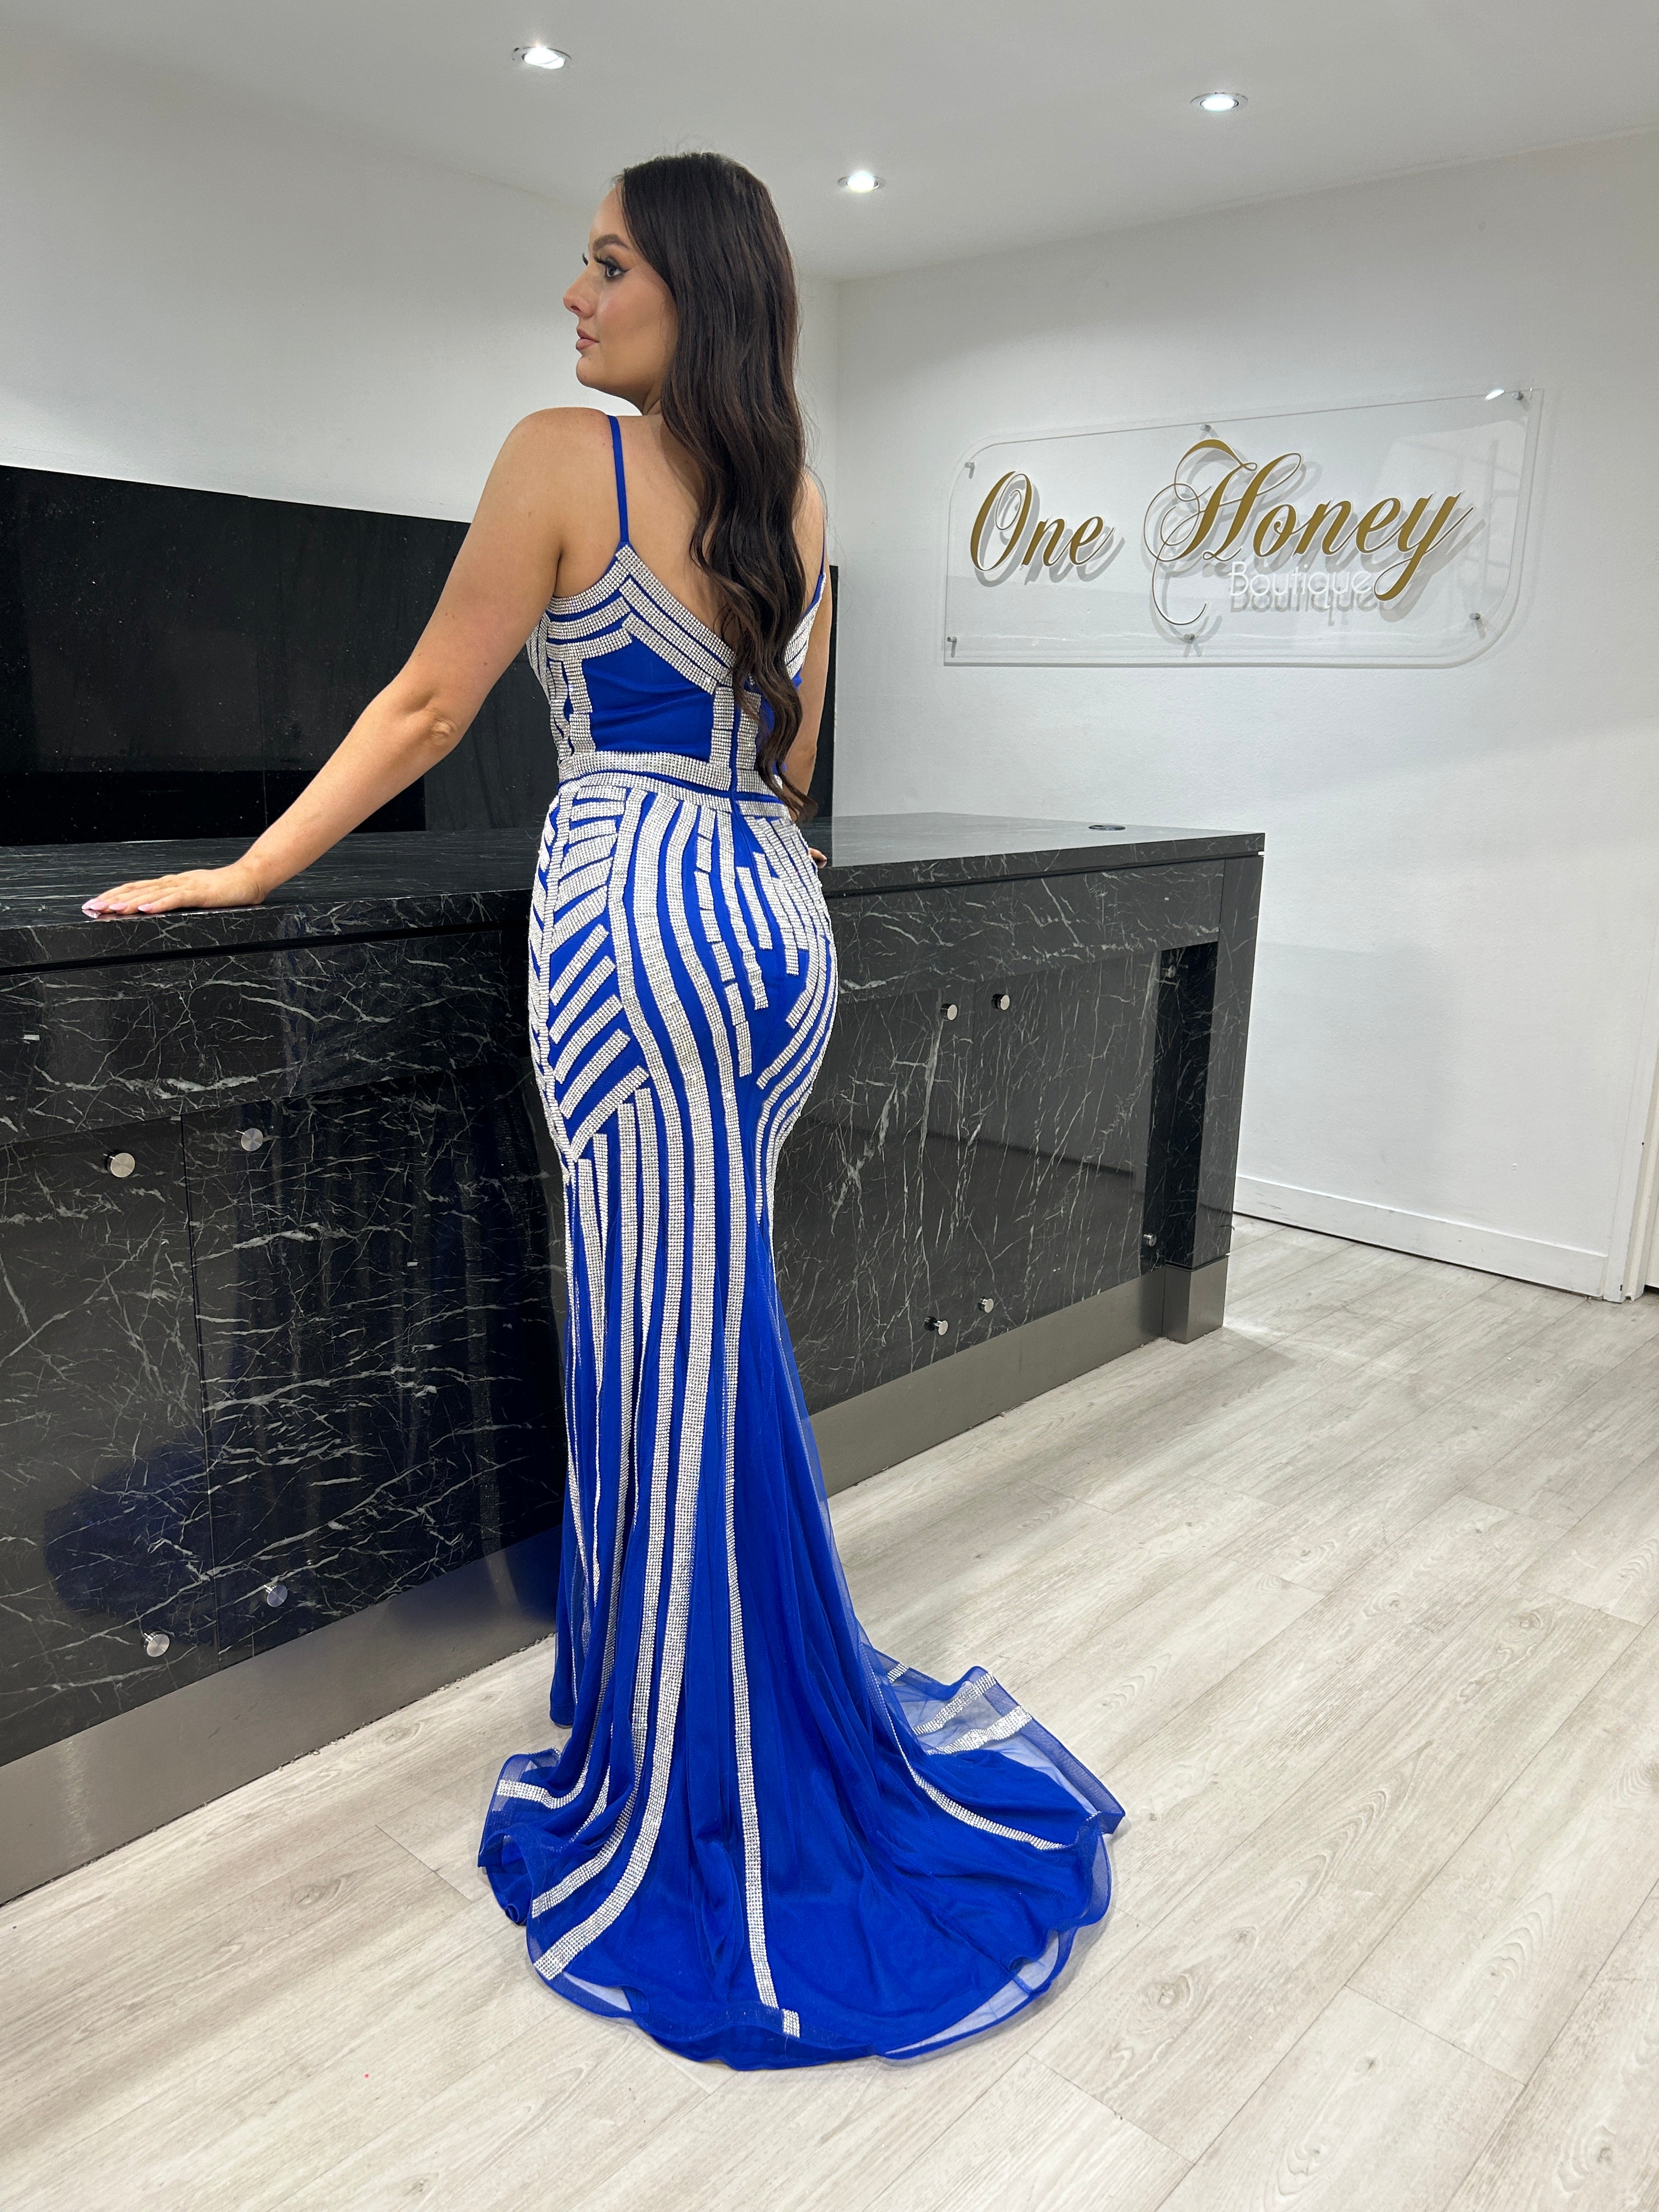 Honey Couture DIAMONDS Blue w Silver Sequin Mermaid Formal Gown Dress